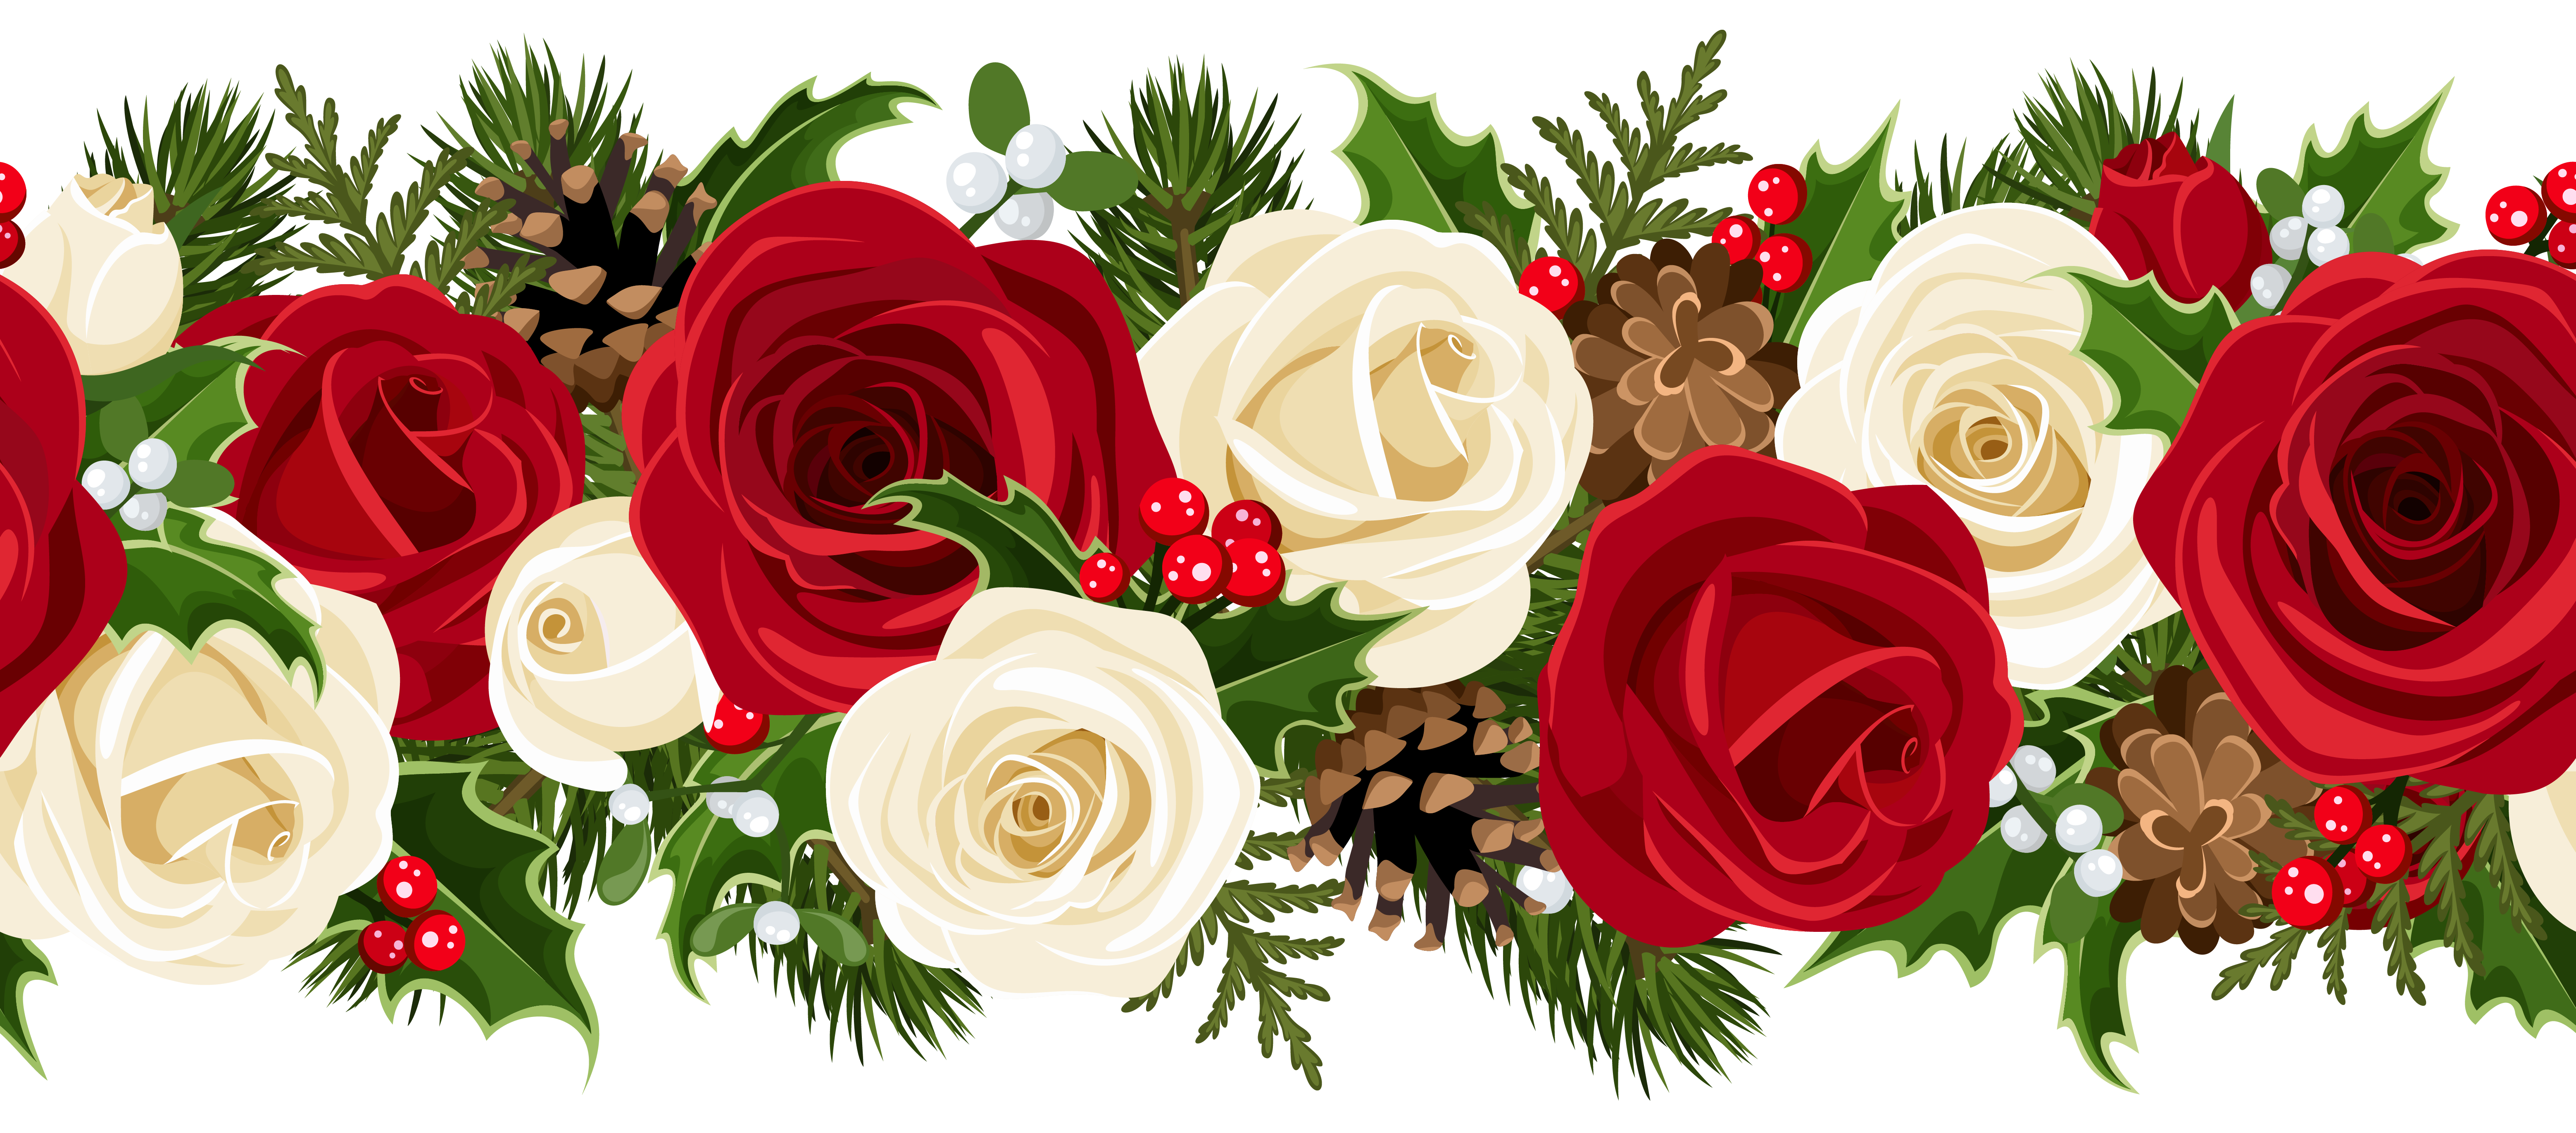 Christmas rose garland png. Lily clipart altar flower